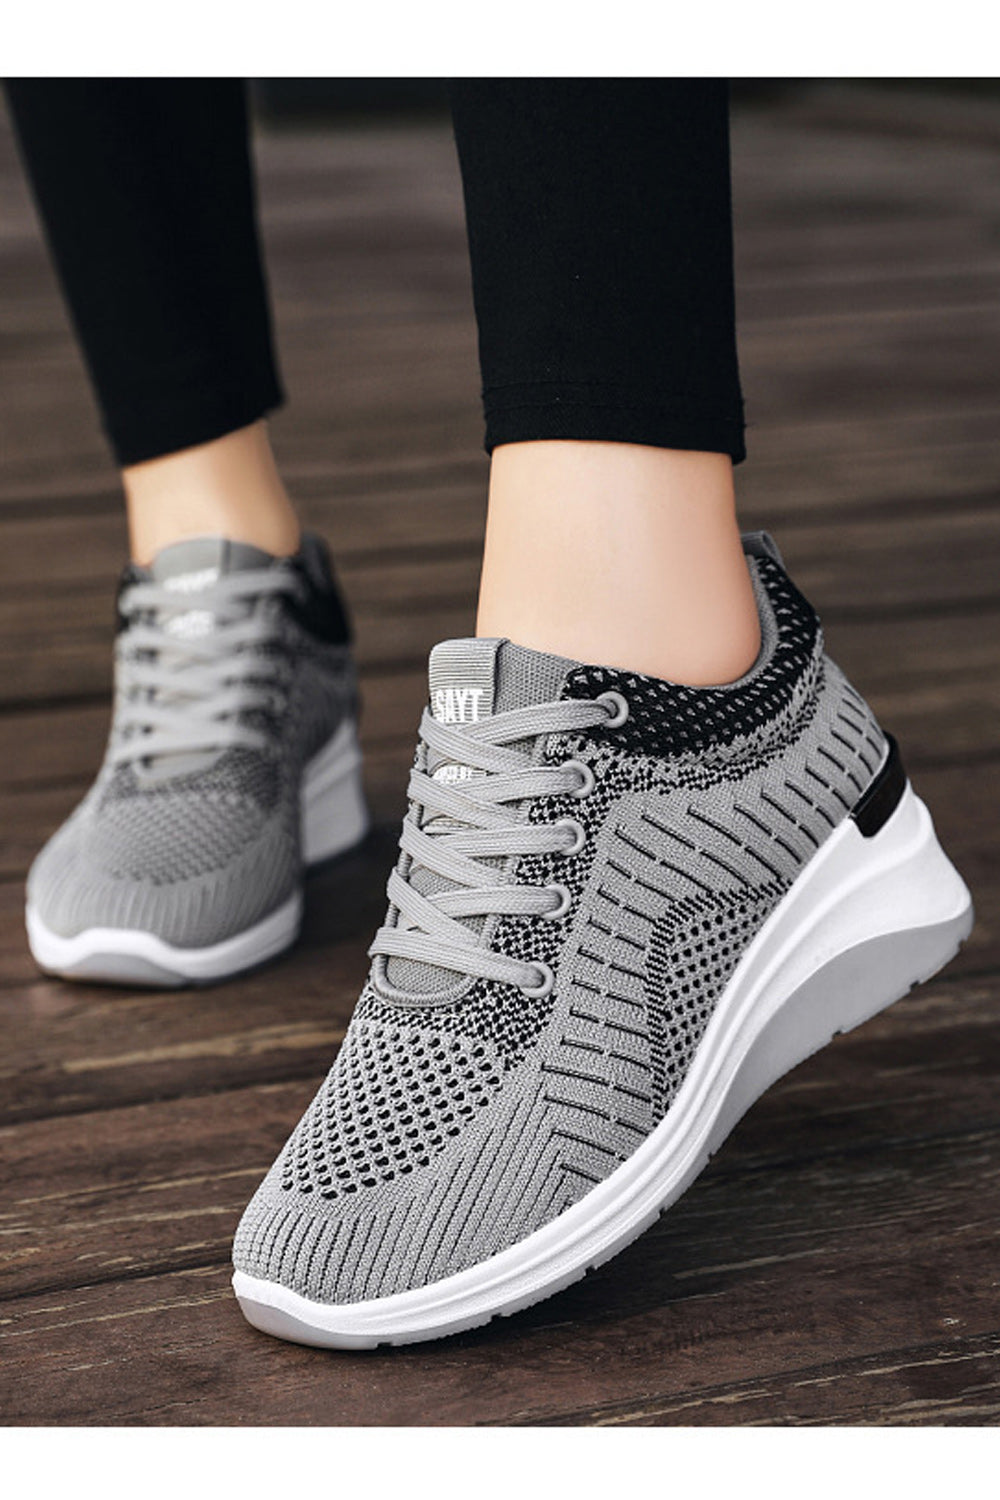 Women Pretty Solid Colored Flat Rubber Surface Restful Inner Collar Comfortable Mesh Round Head Sneaker Shoes - WSA109806